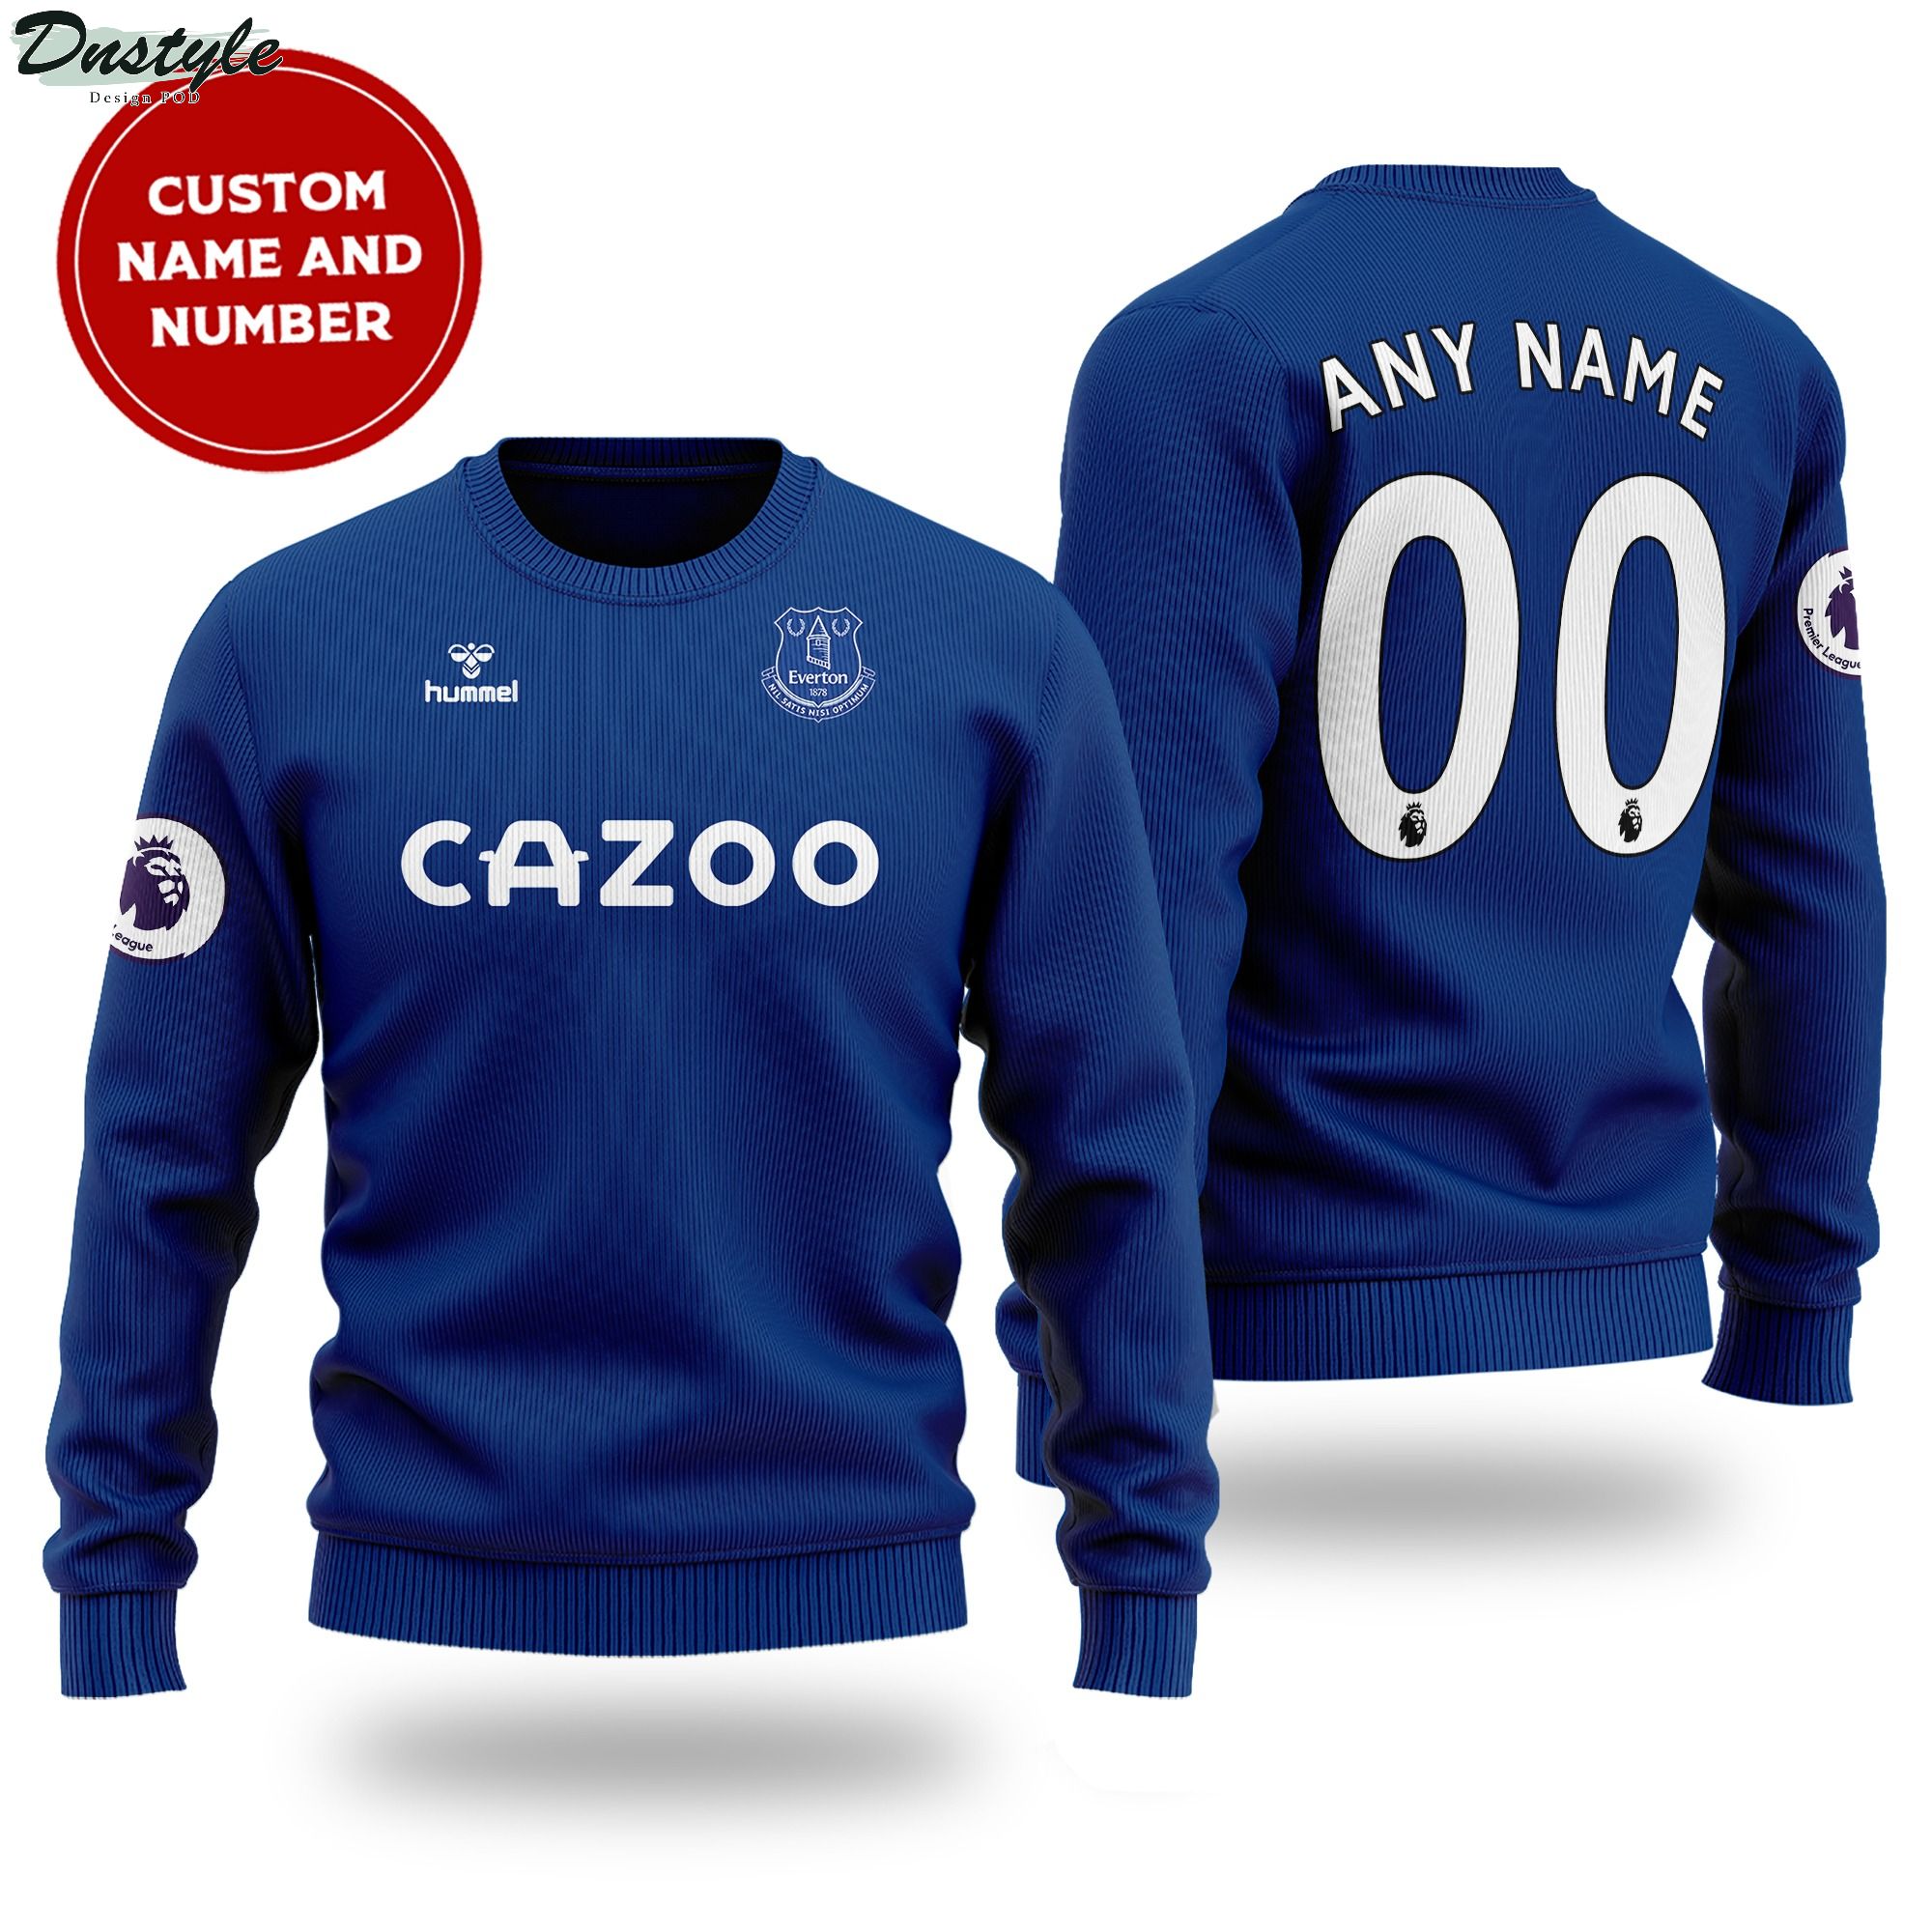 Everton cazoo custom name and number ugly sweater